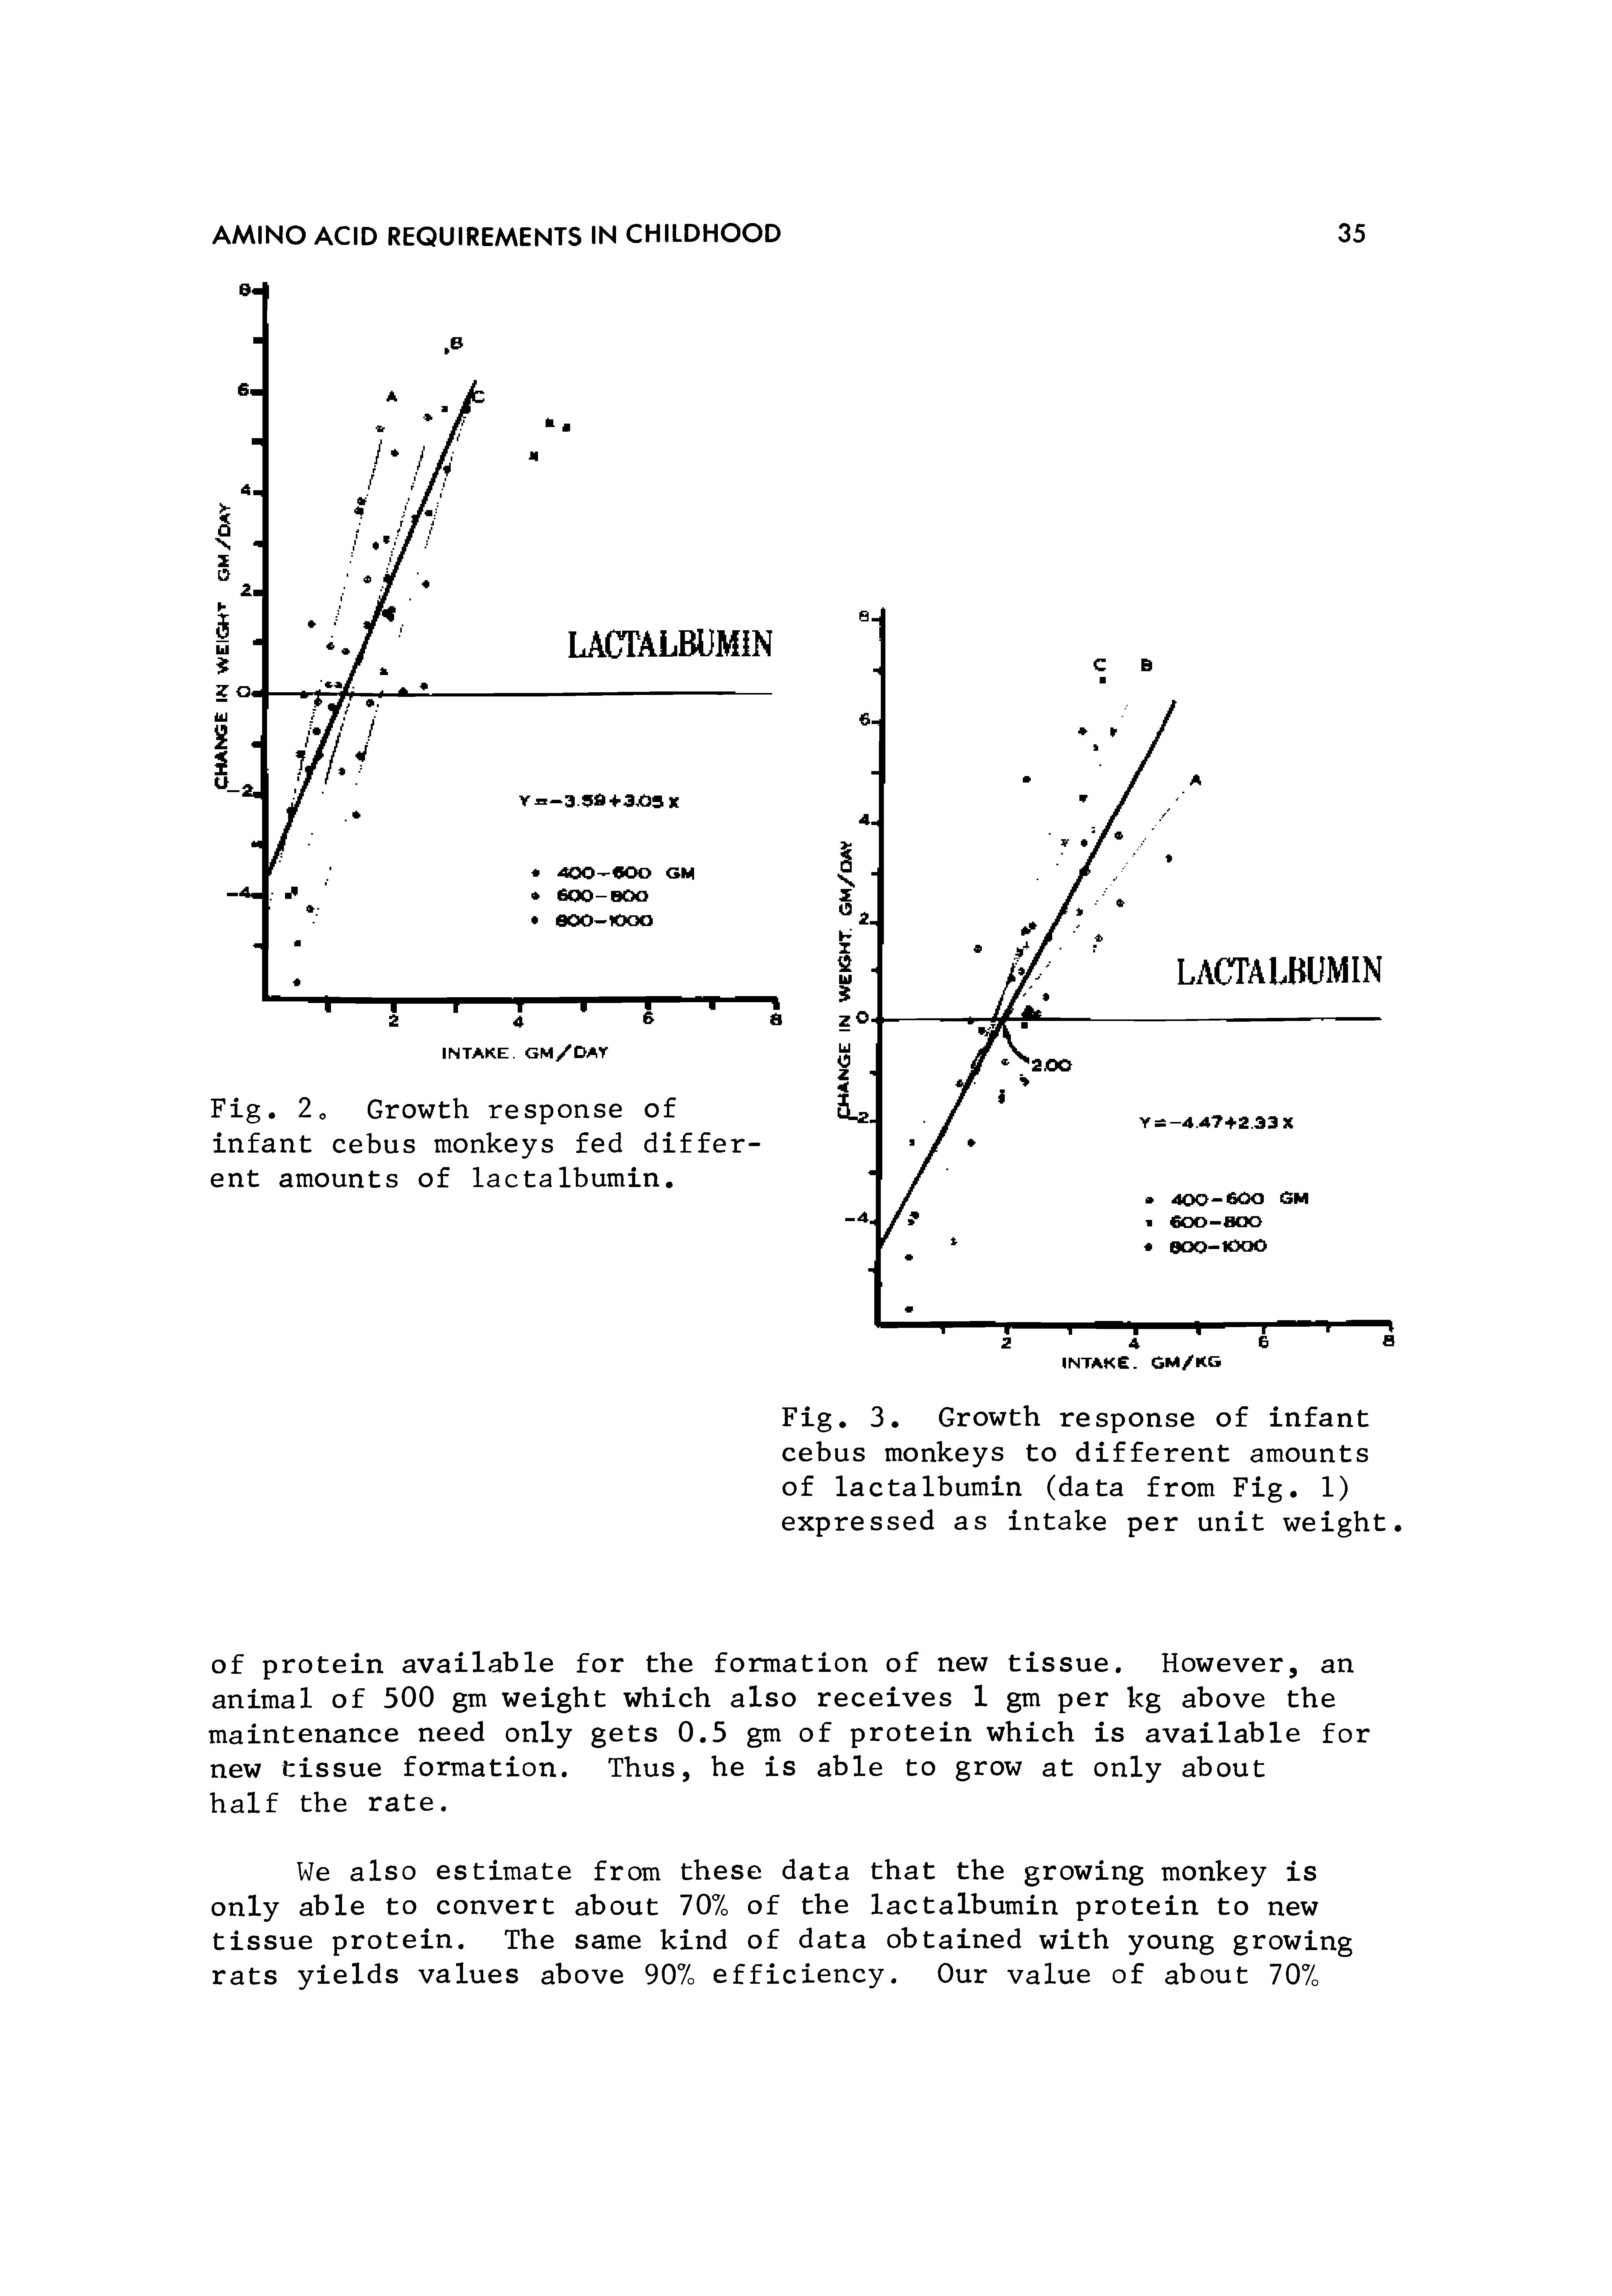 Fig. 3. Growth response of infant cebus monkeys to different amounts of lactalbumin (data from Fig. 1) expressed as intake per unit weight.